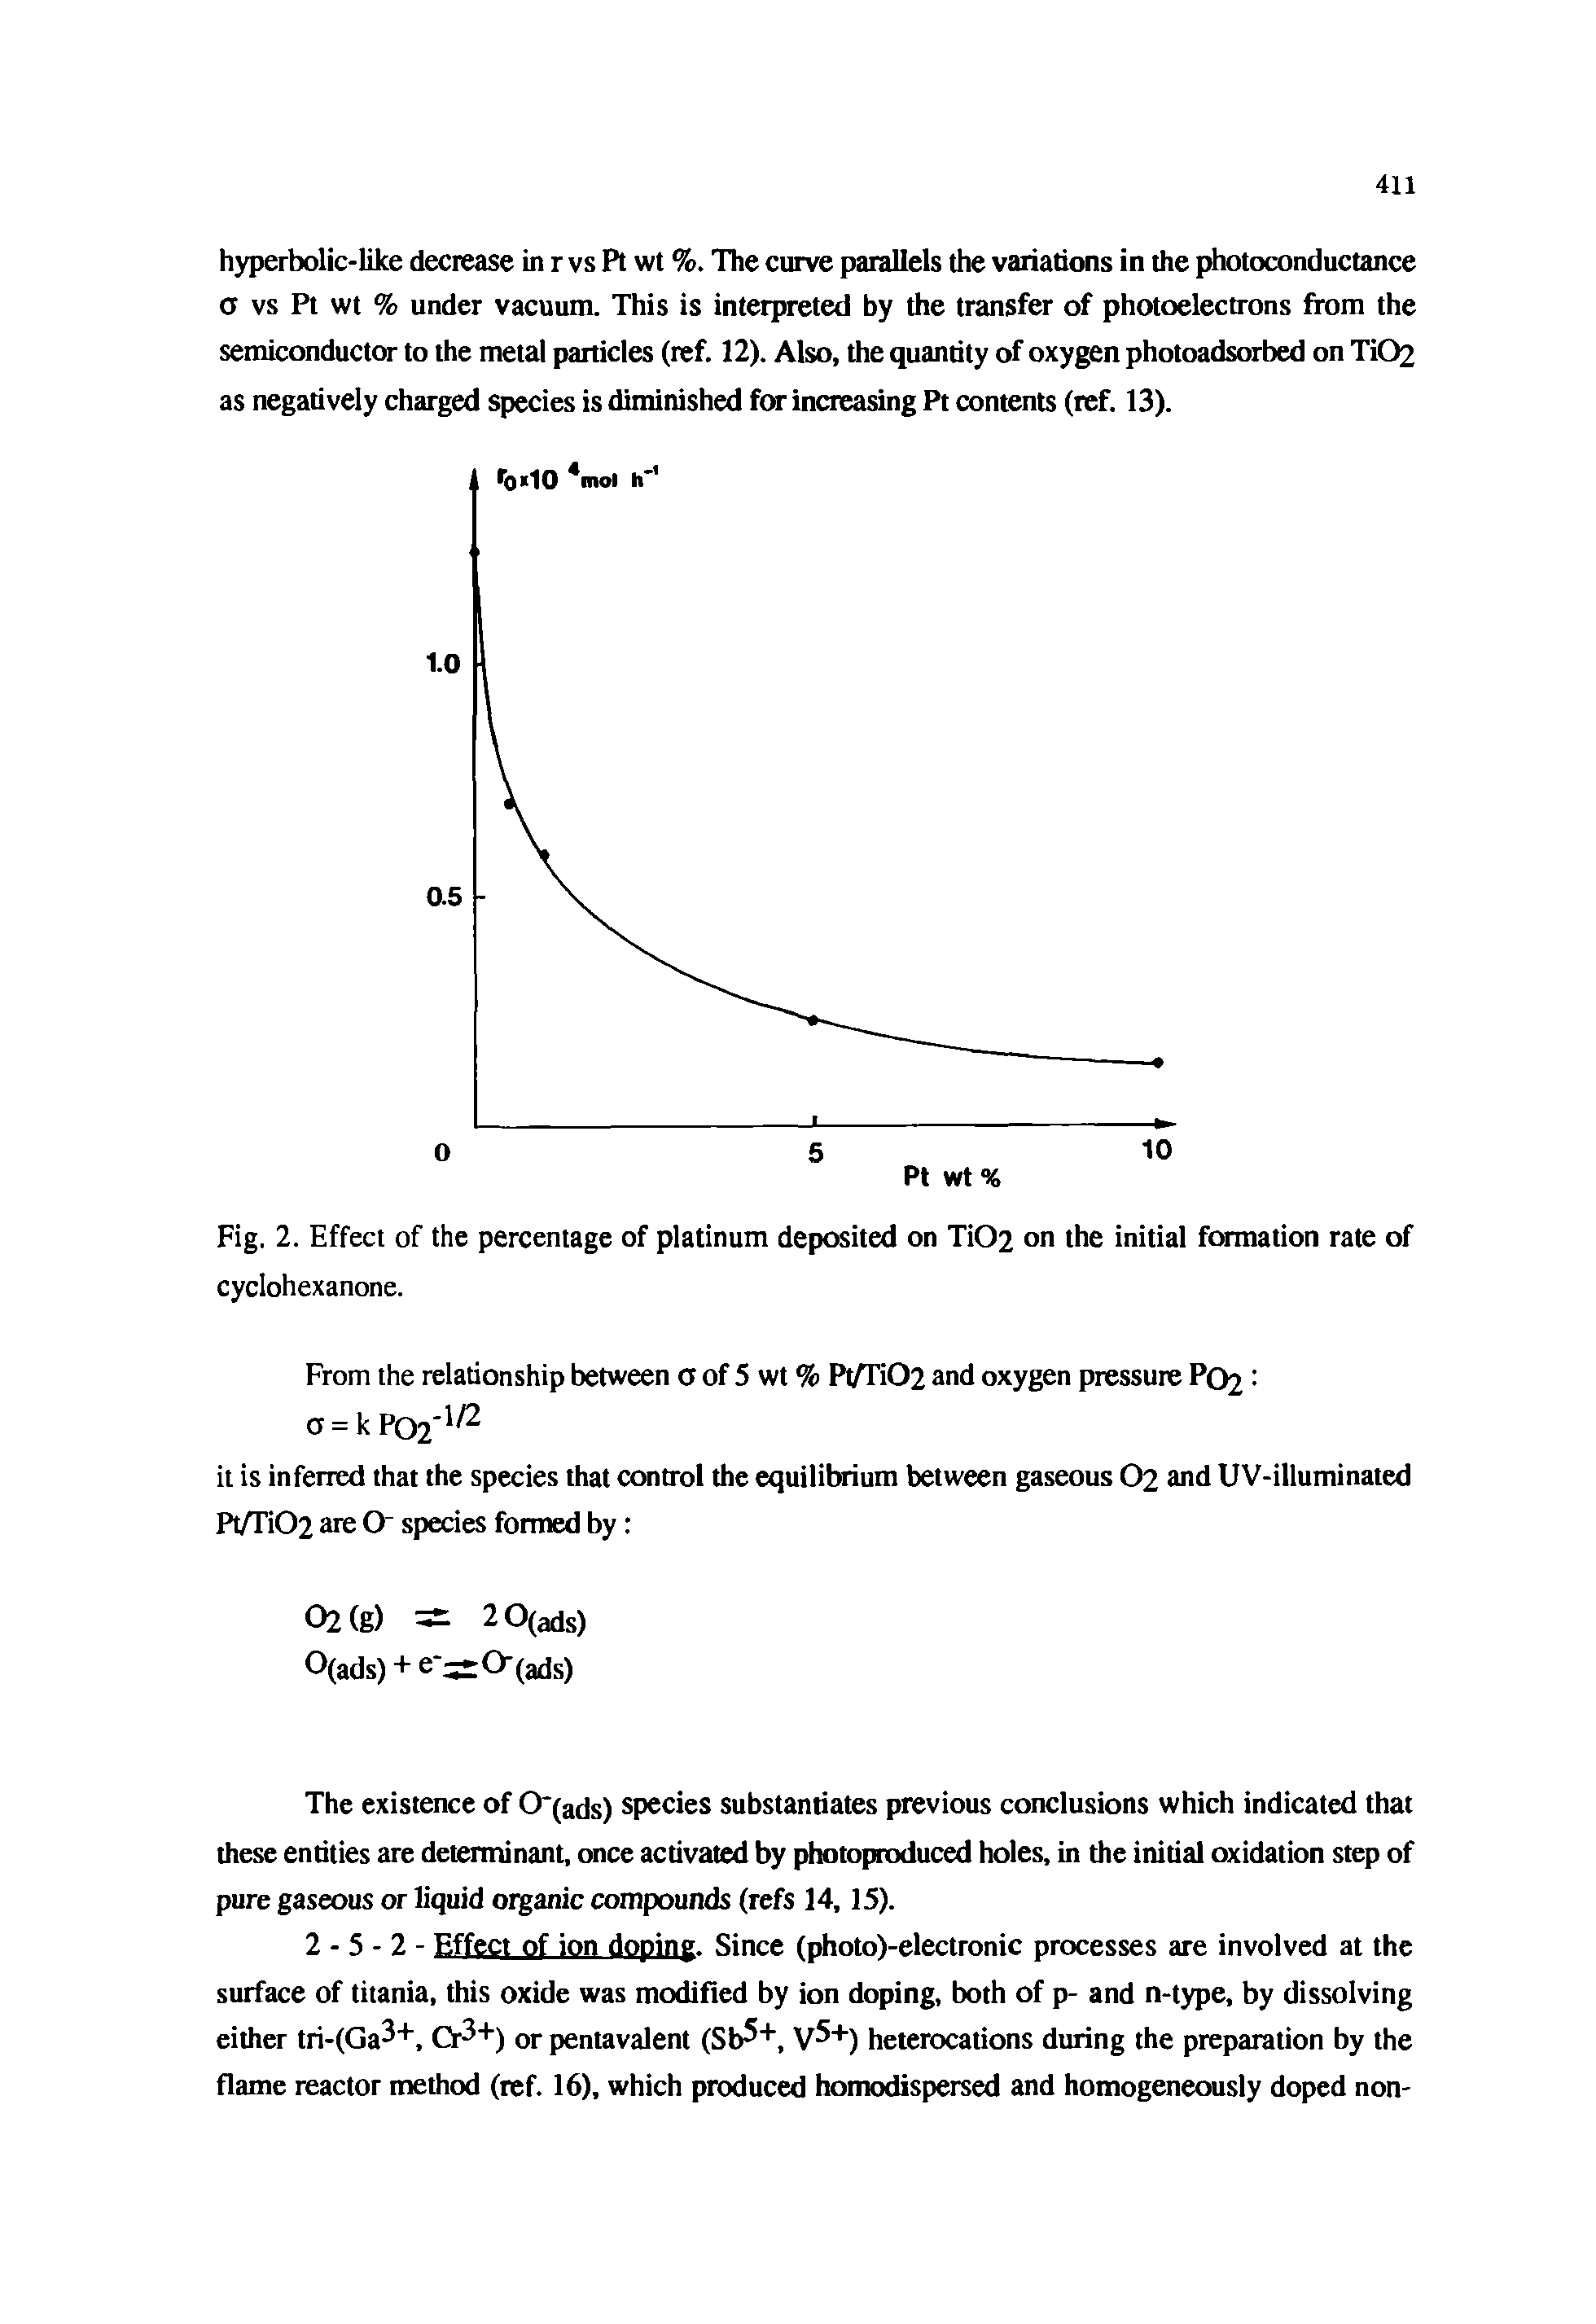 Fig. 2. Effect of the percentage of platinum deposited on Ti02 on the initial formation rate of cyclohexanone.